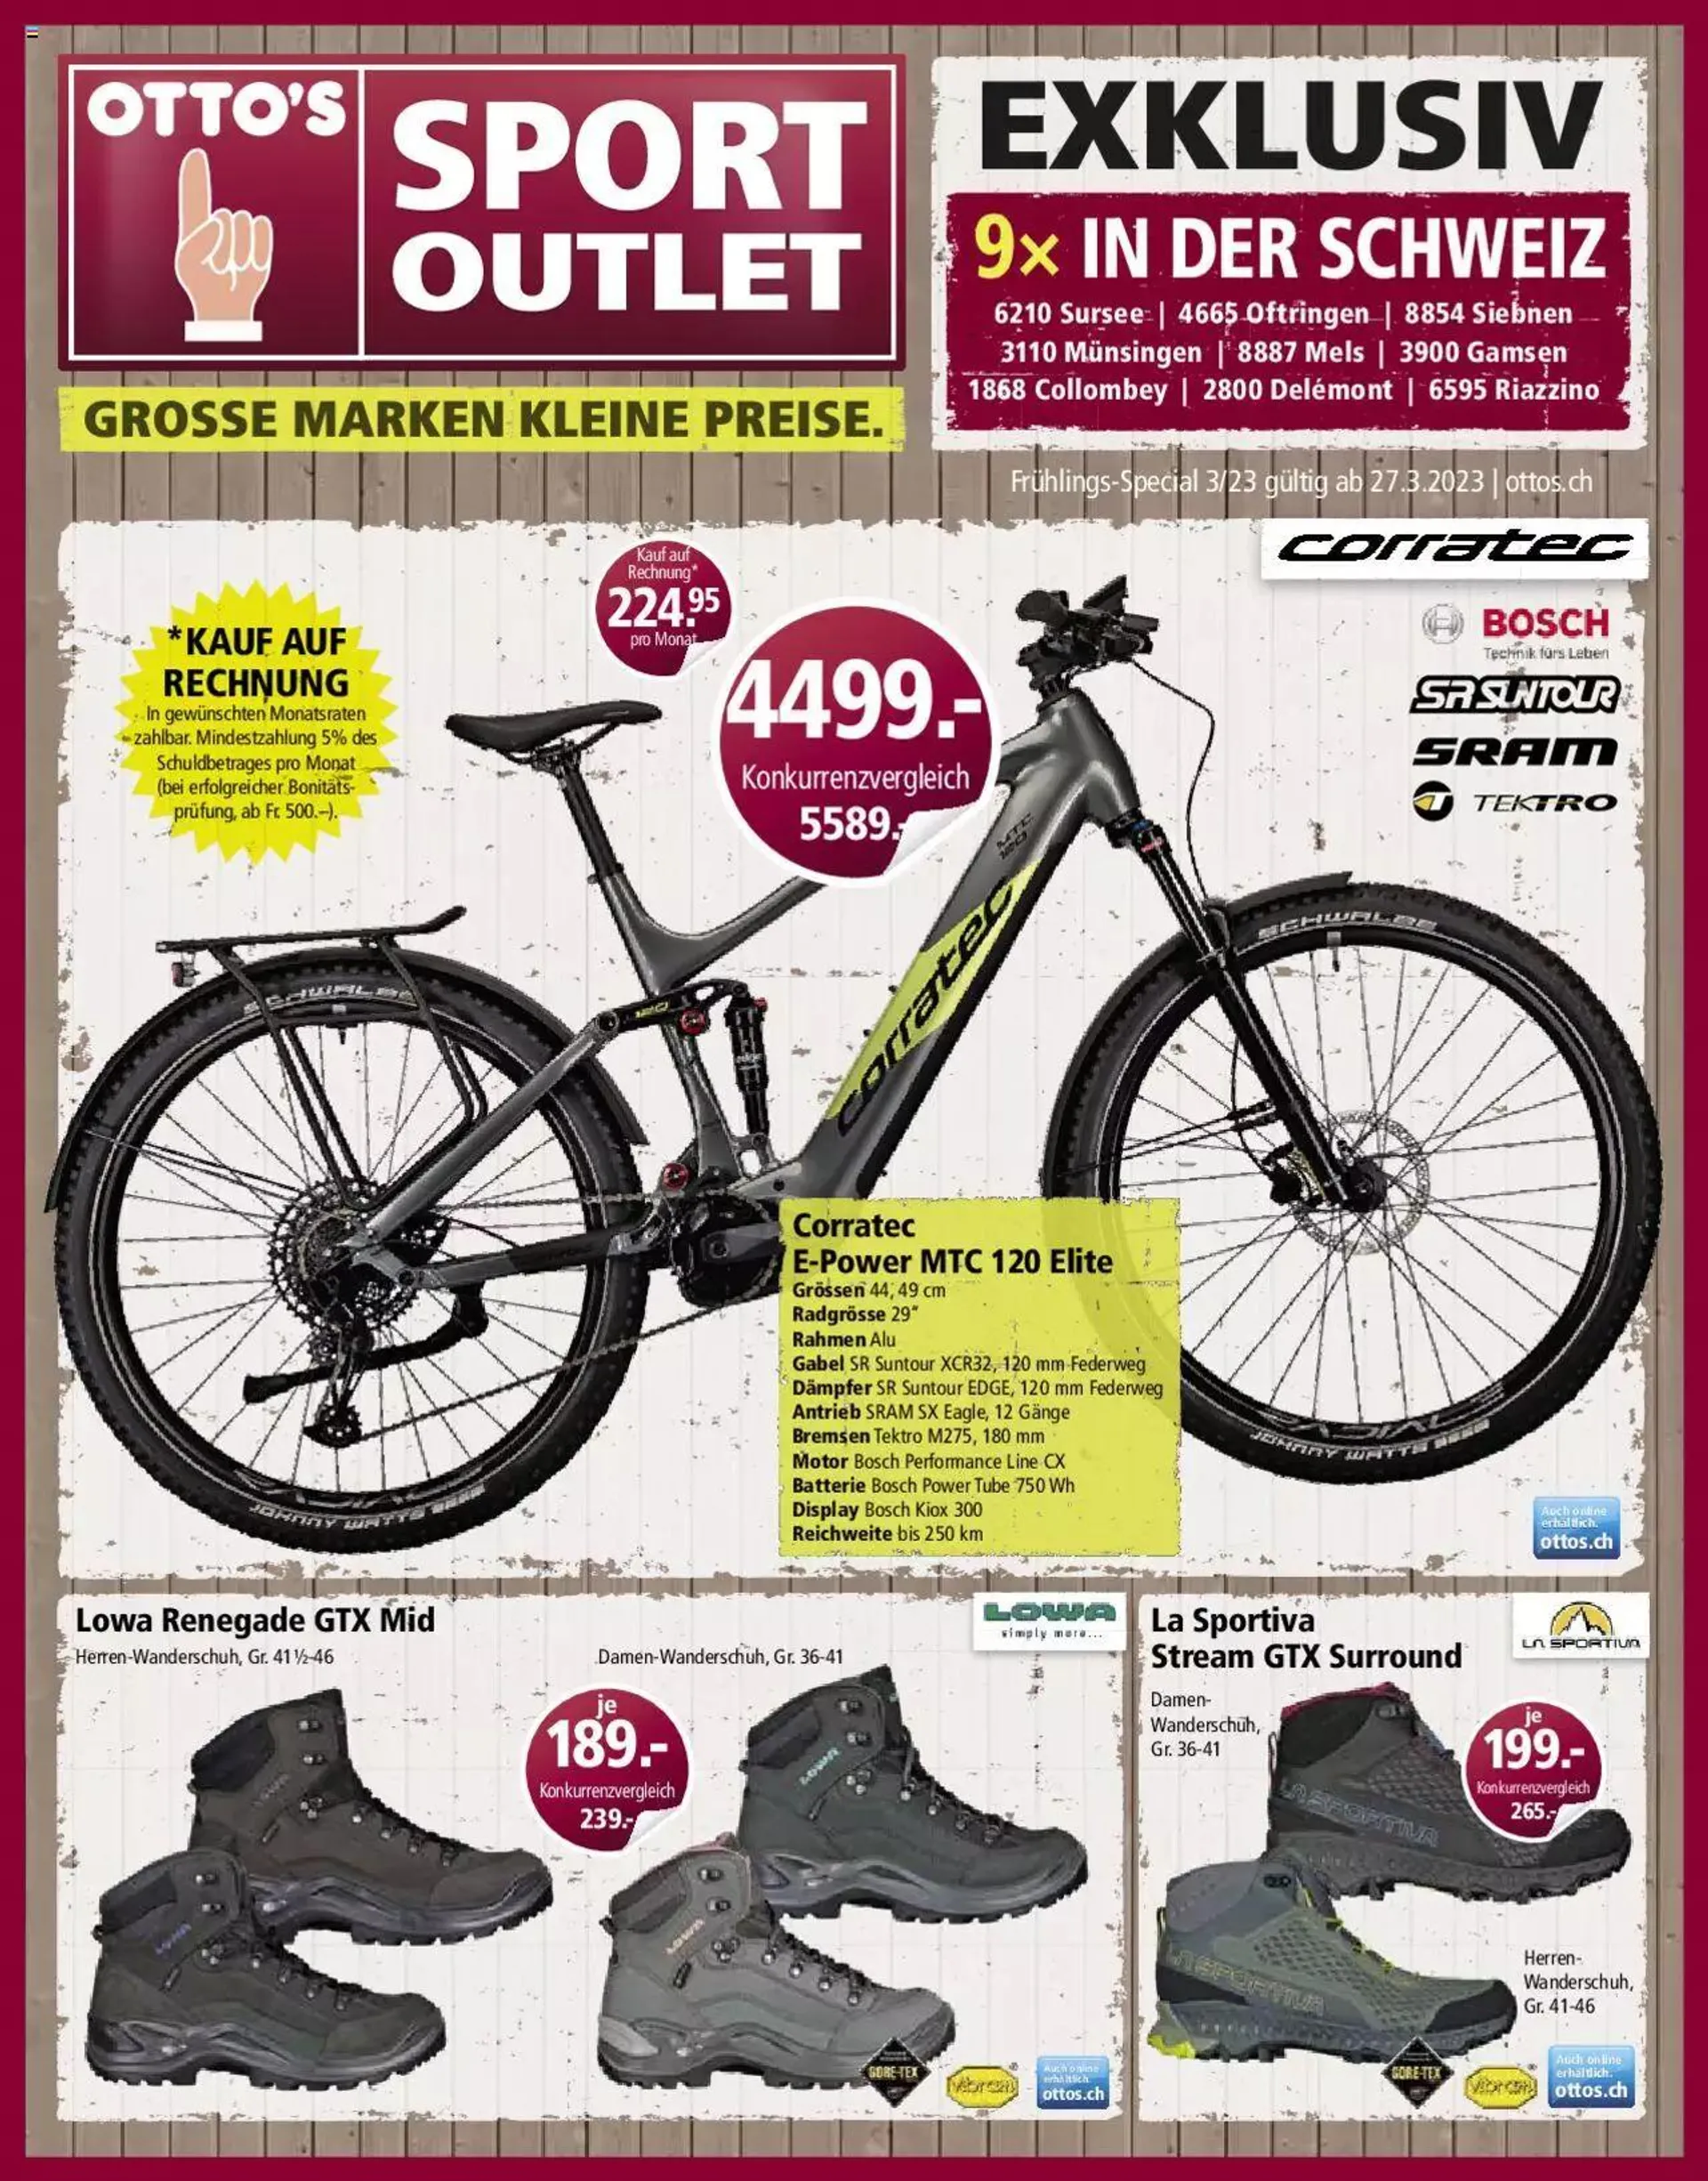 Otto's Sport Outlet